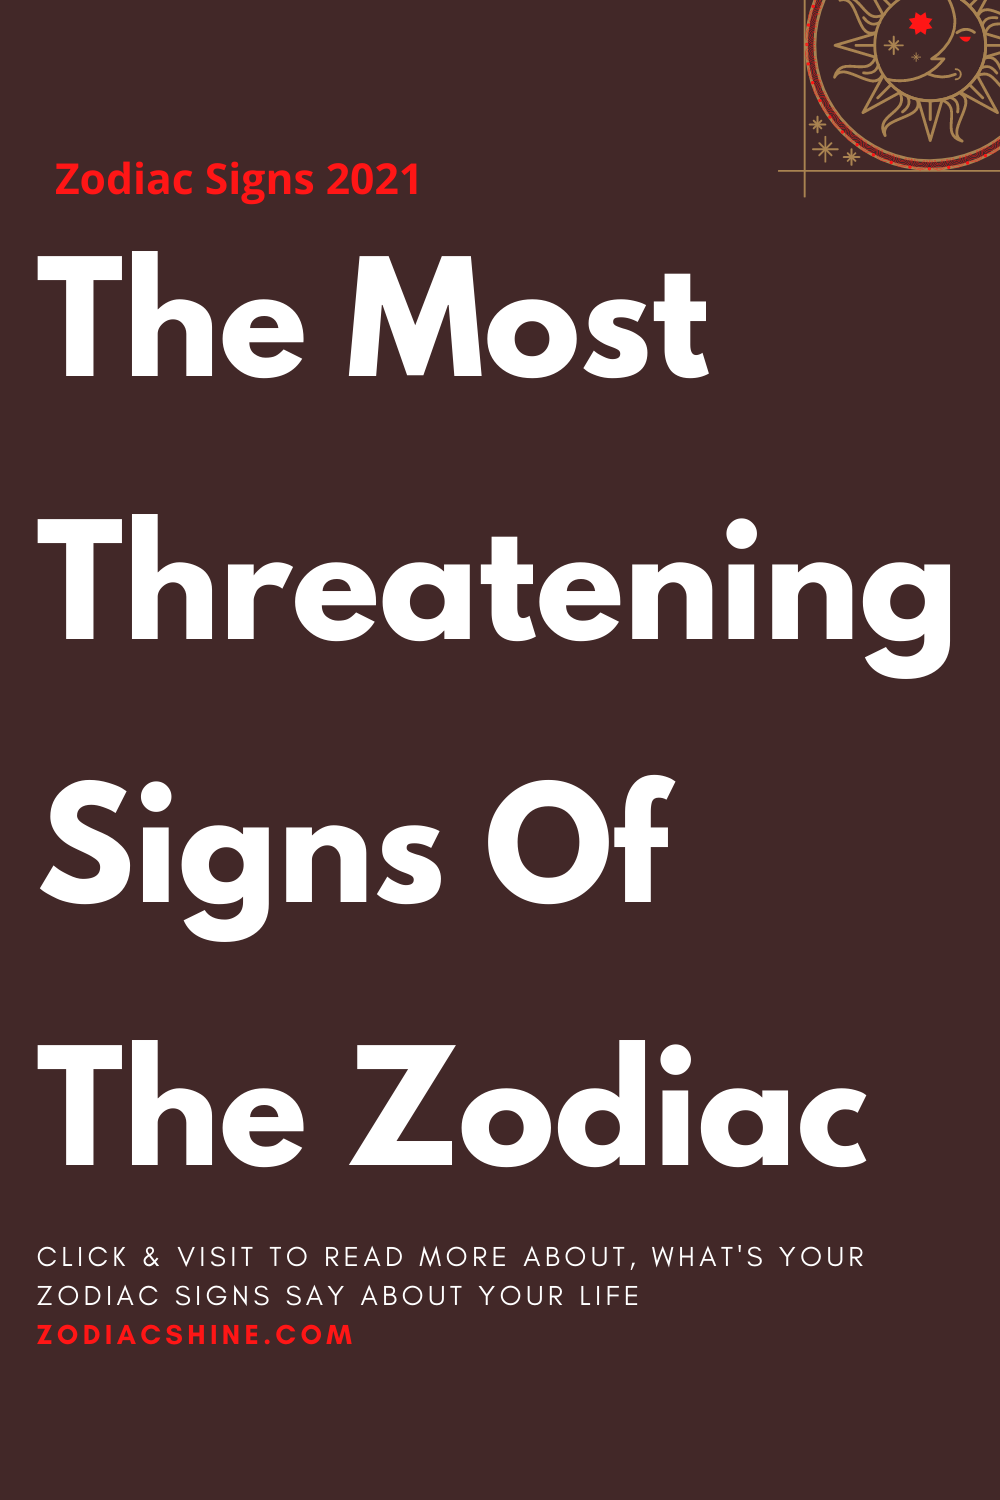 The Most Threatening Signs Of The Zodiac